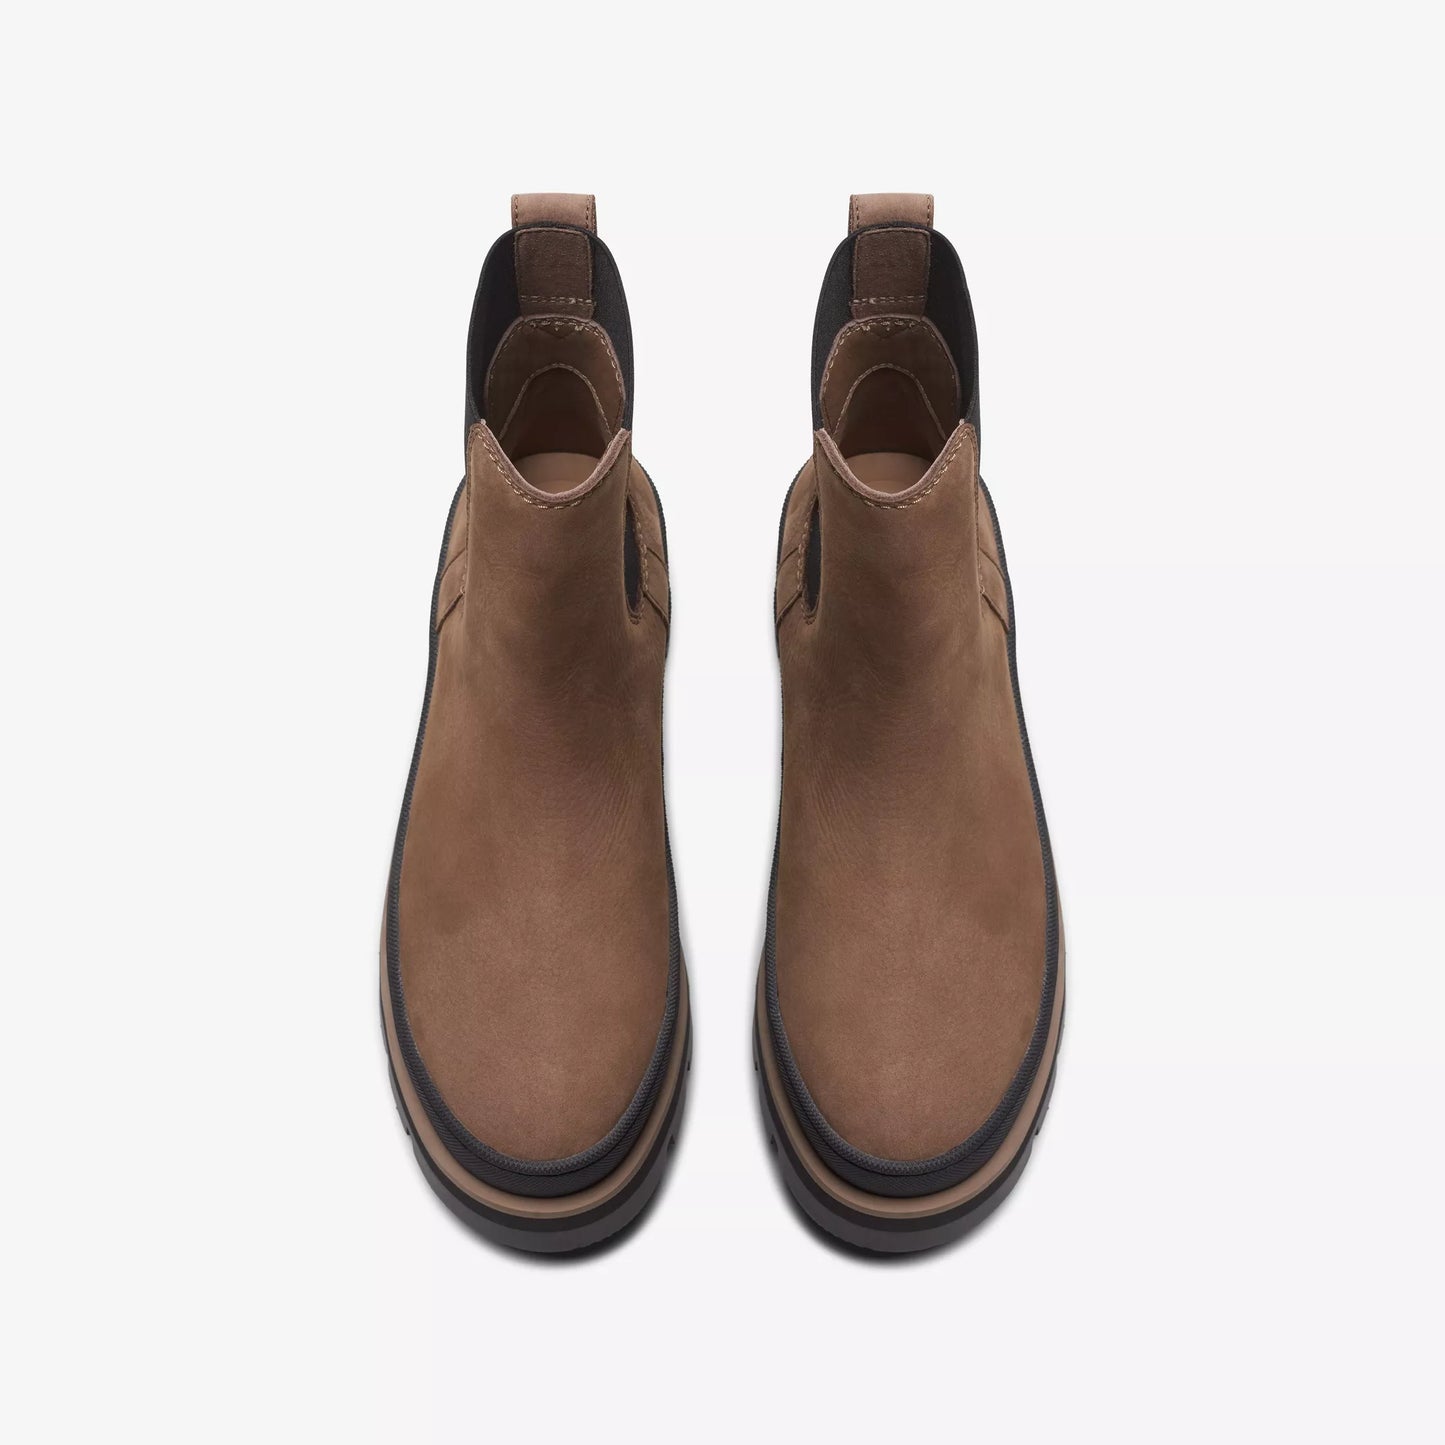 Load image into Gallery viewer, Clarks Orianna2 Top Chelsea Boot - Pebble Nubuck
